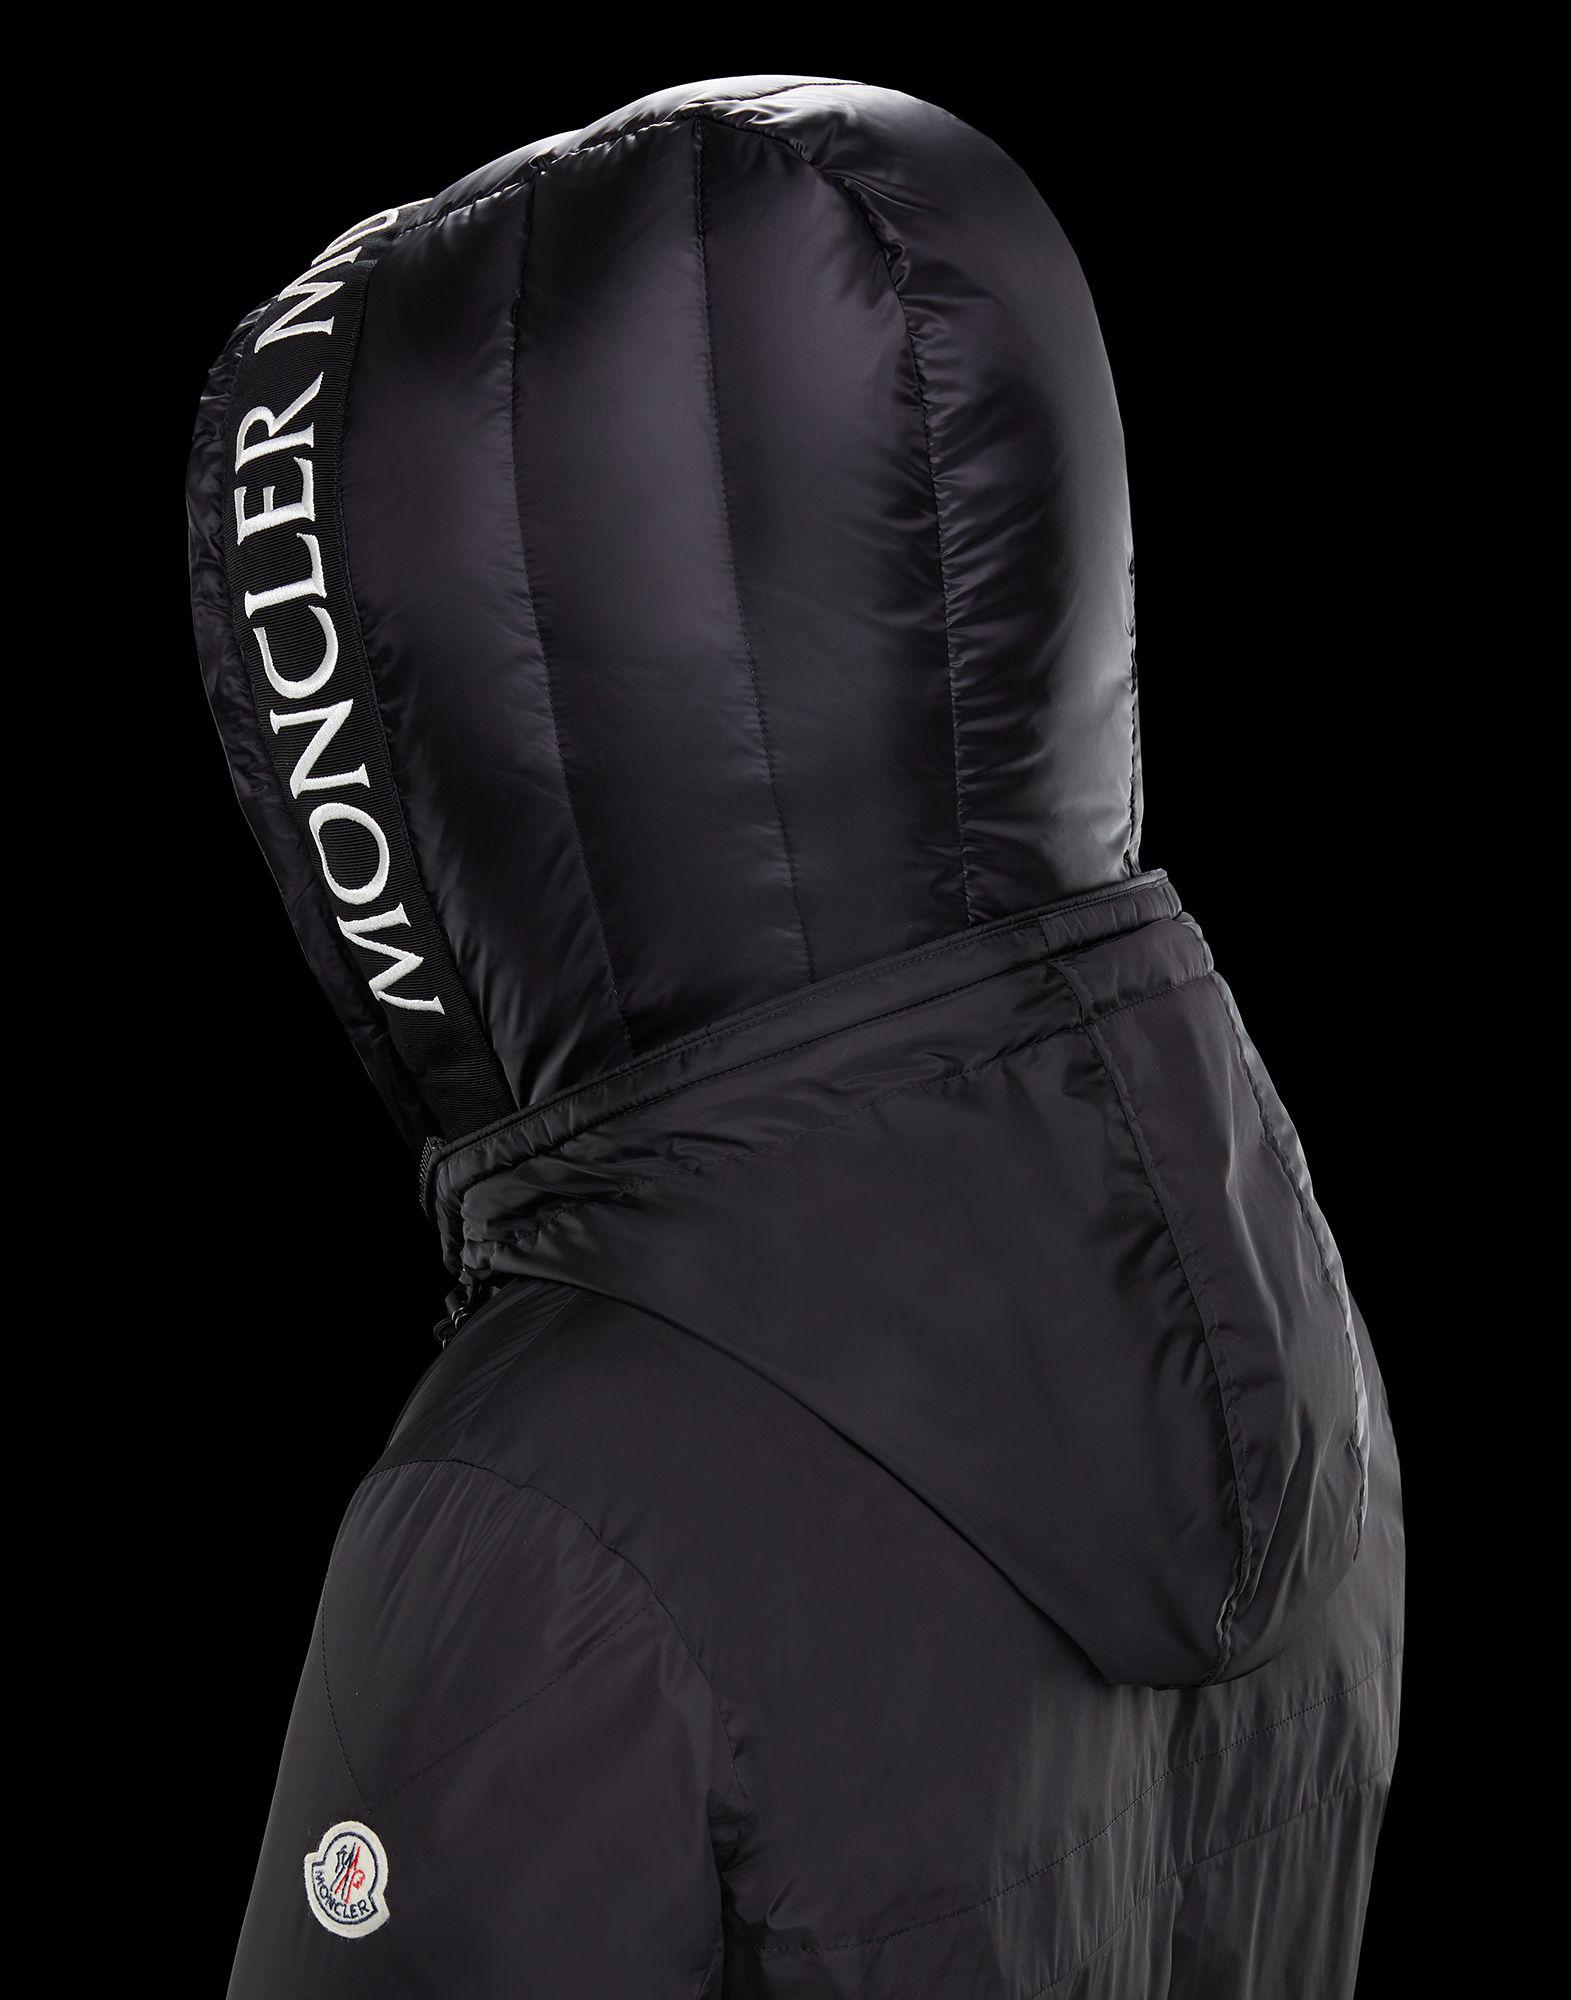 moncler jacket with writing